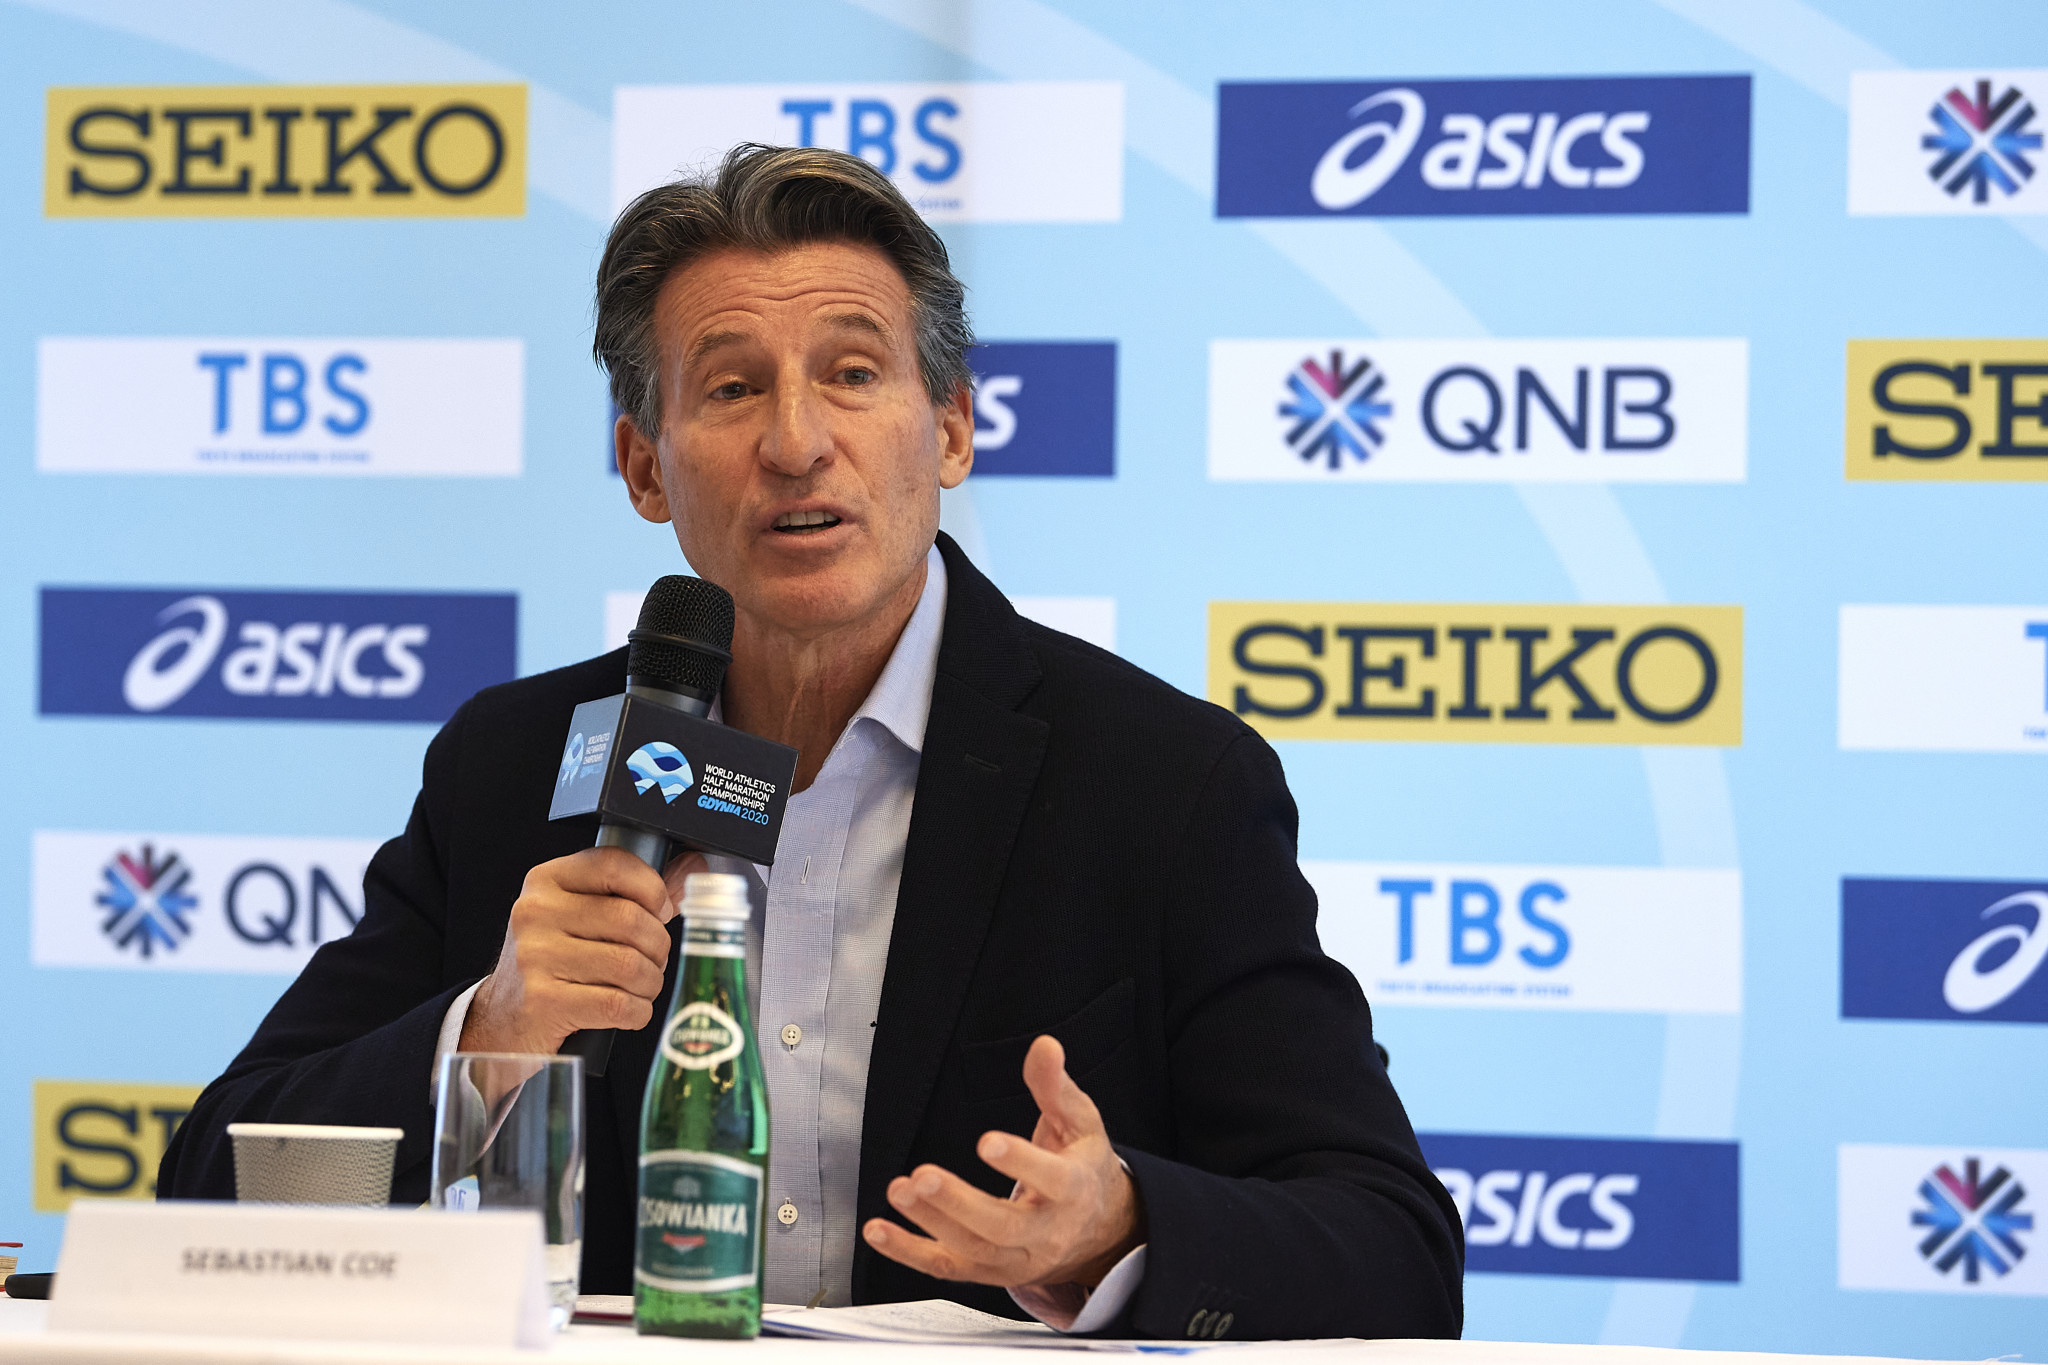 Coe claims doping athletes have a "greater chance of being caught" at Tokyo 2020 than any other Games